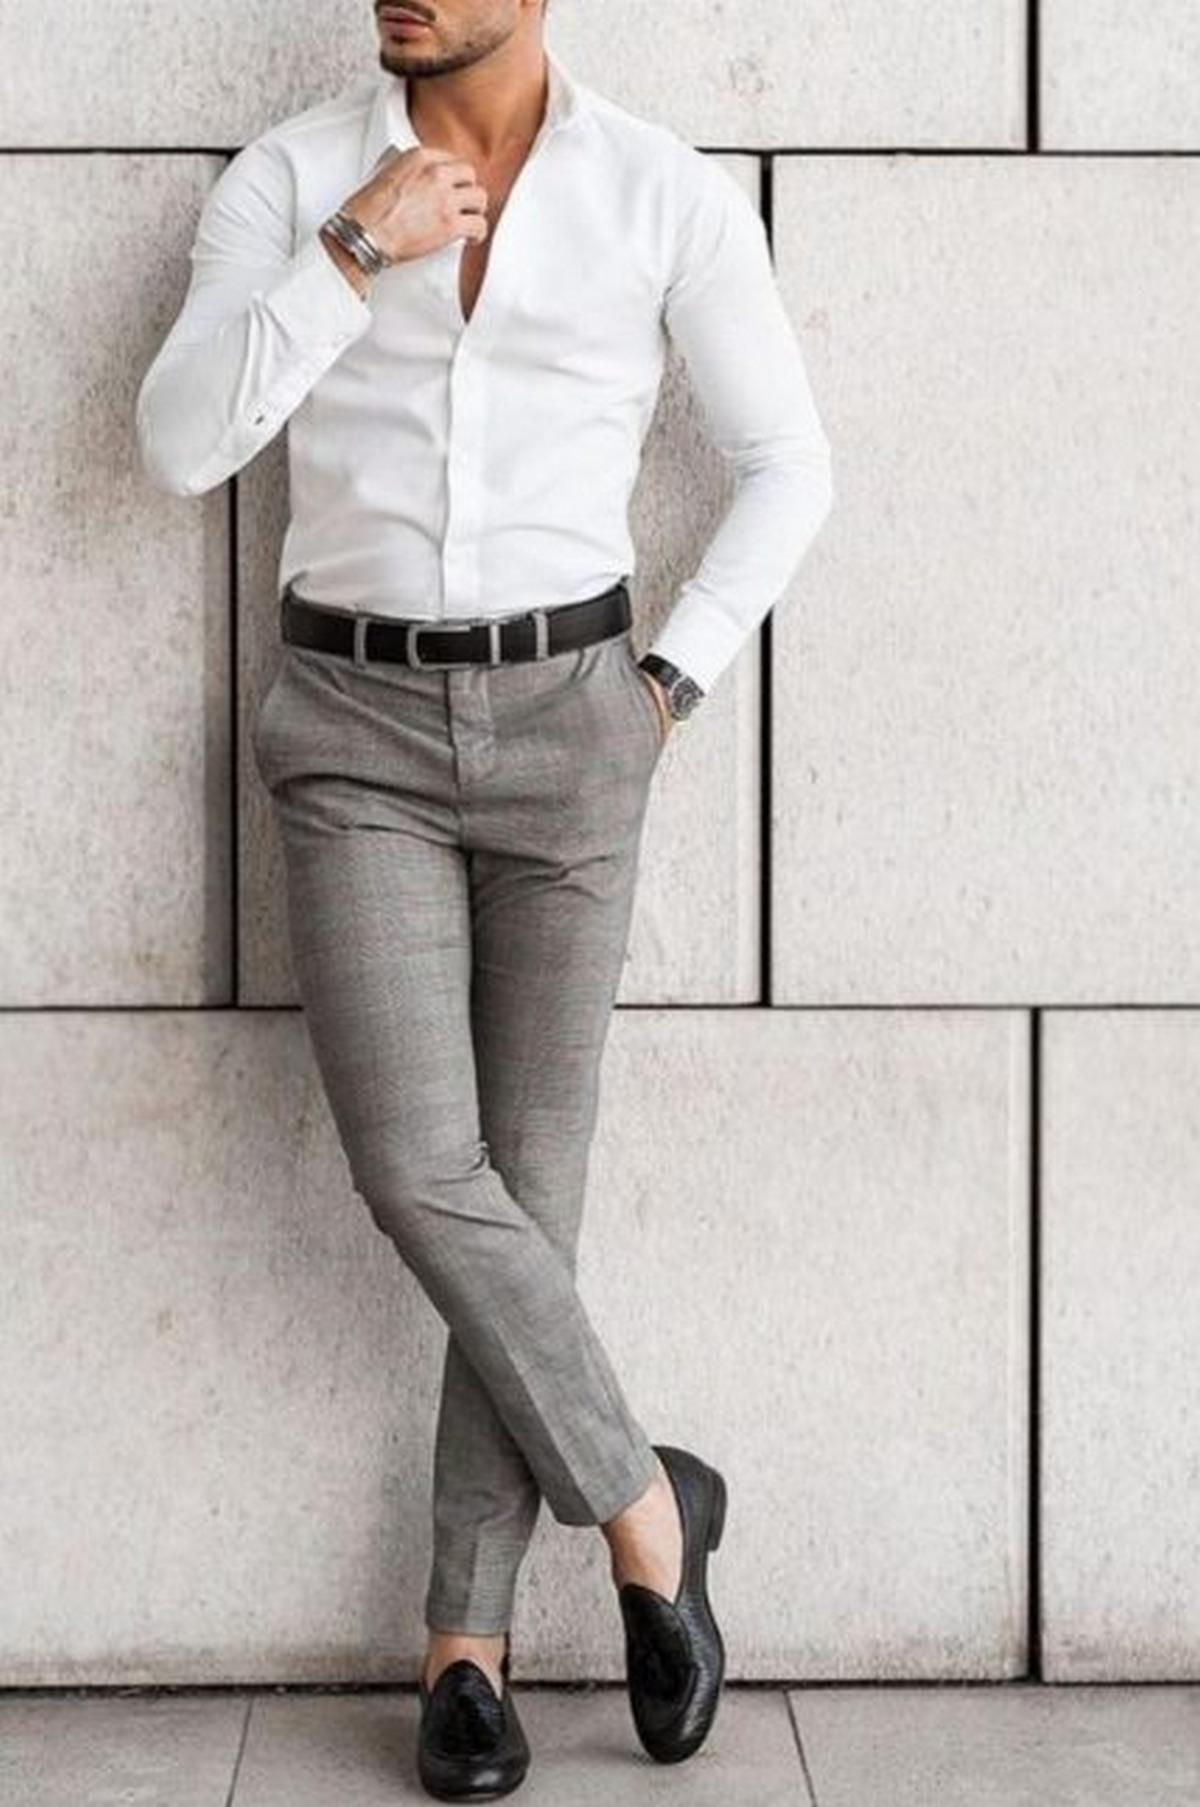 White Shirt And Gray Pants For Men